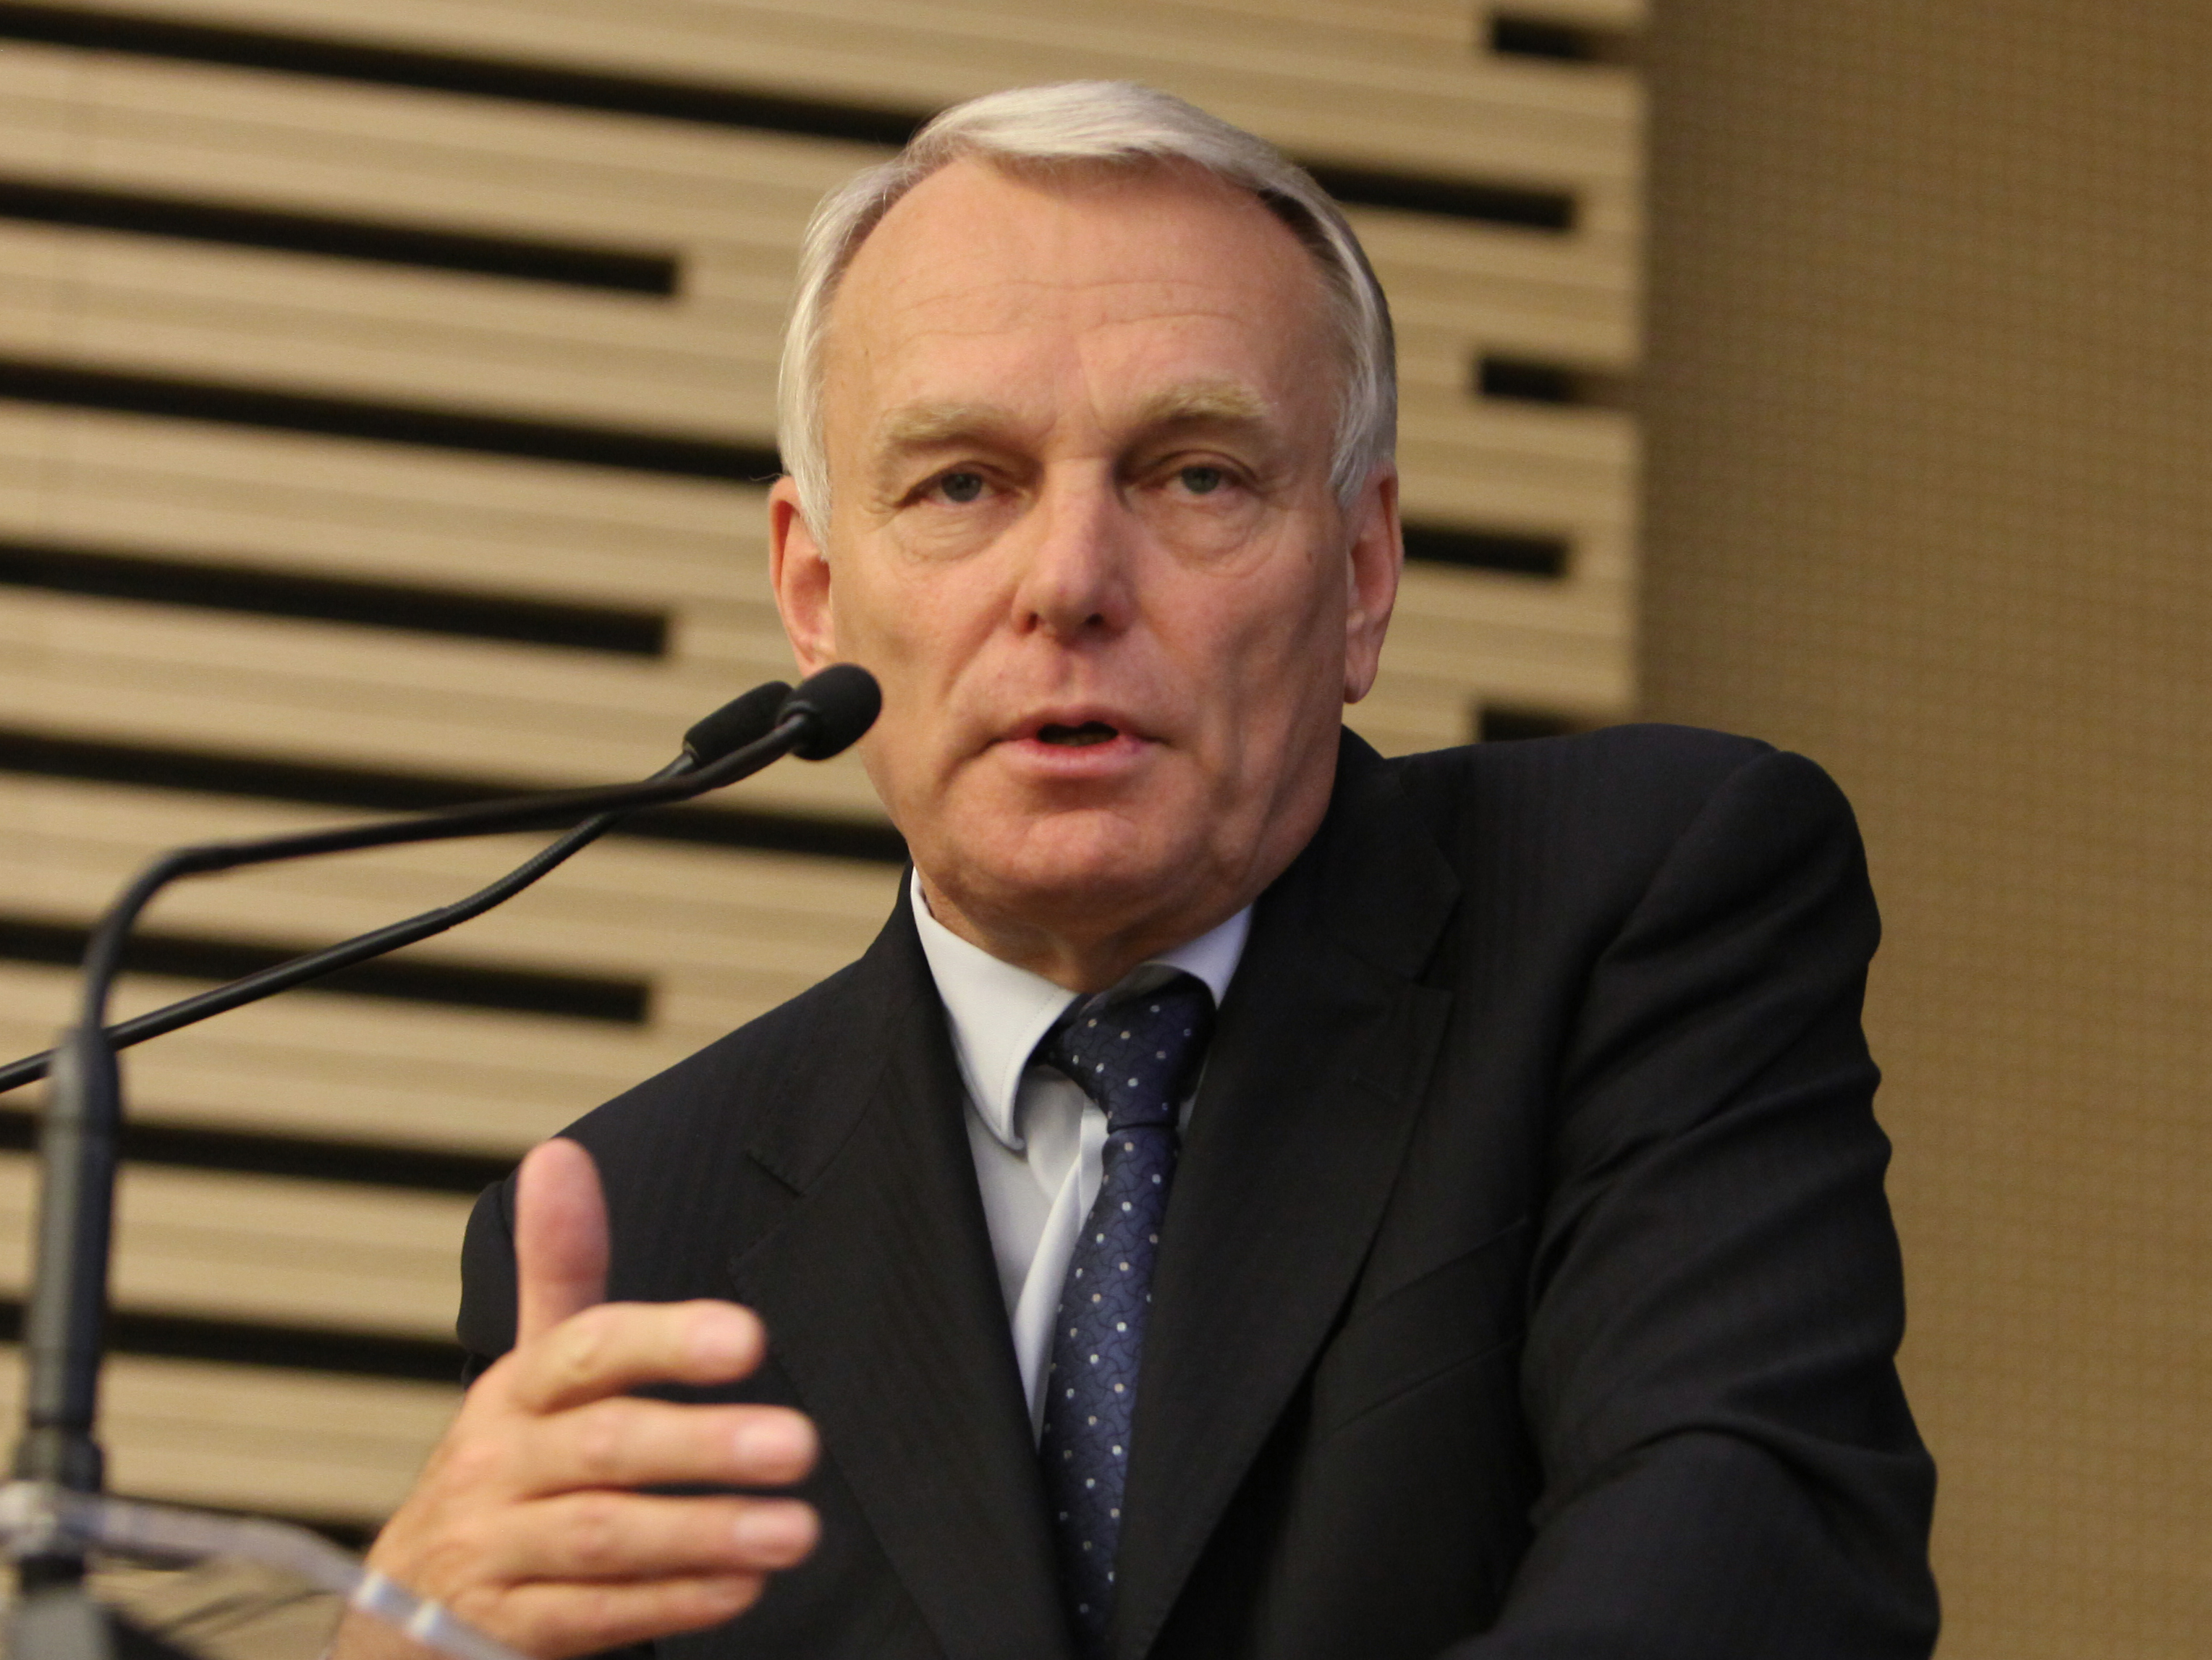 Jean-Marc Ayrault's quote #3